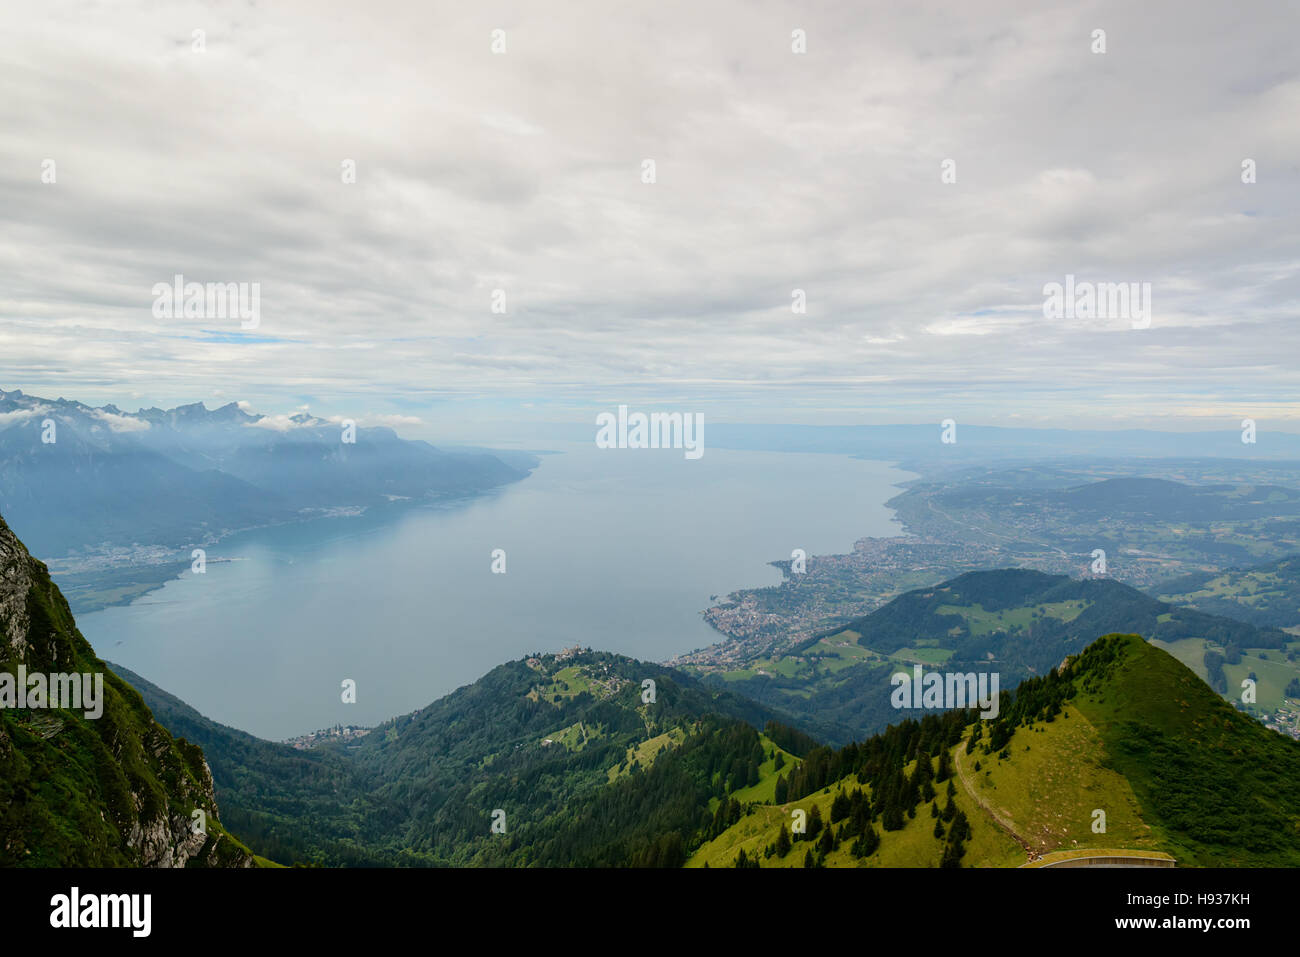 Lake Geneva and Montreux city from the view platform on Rochers-de-Naye Stock Photo